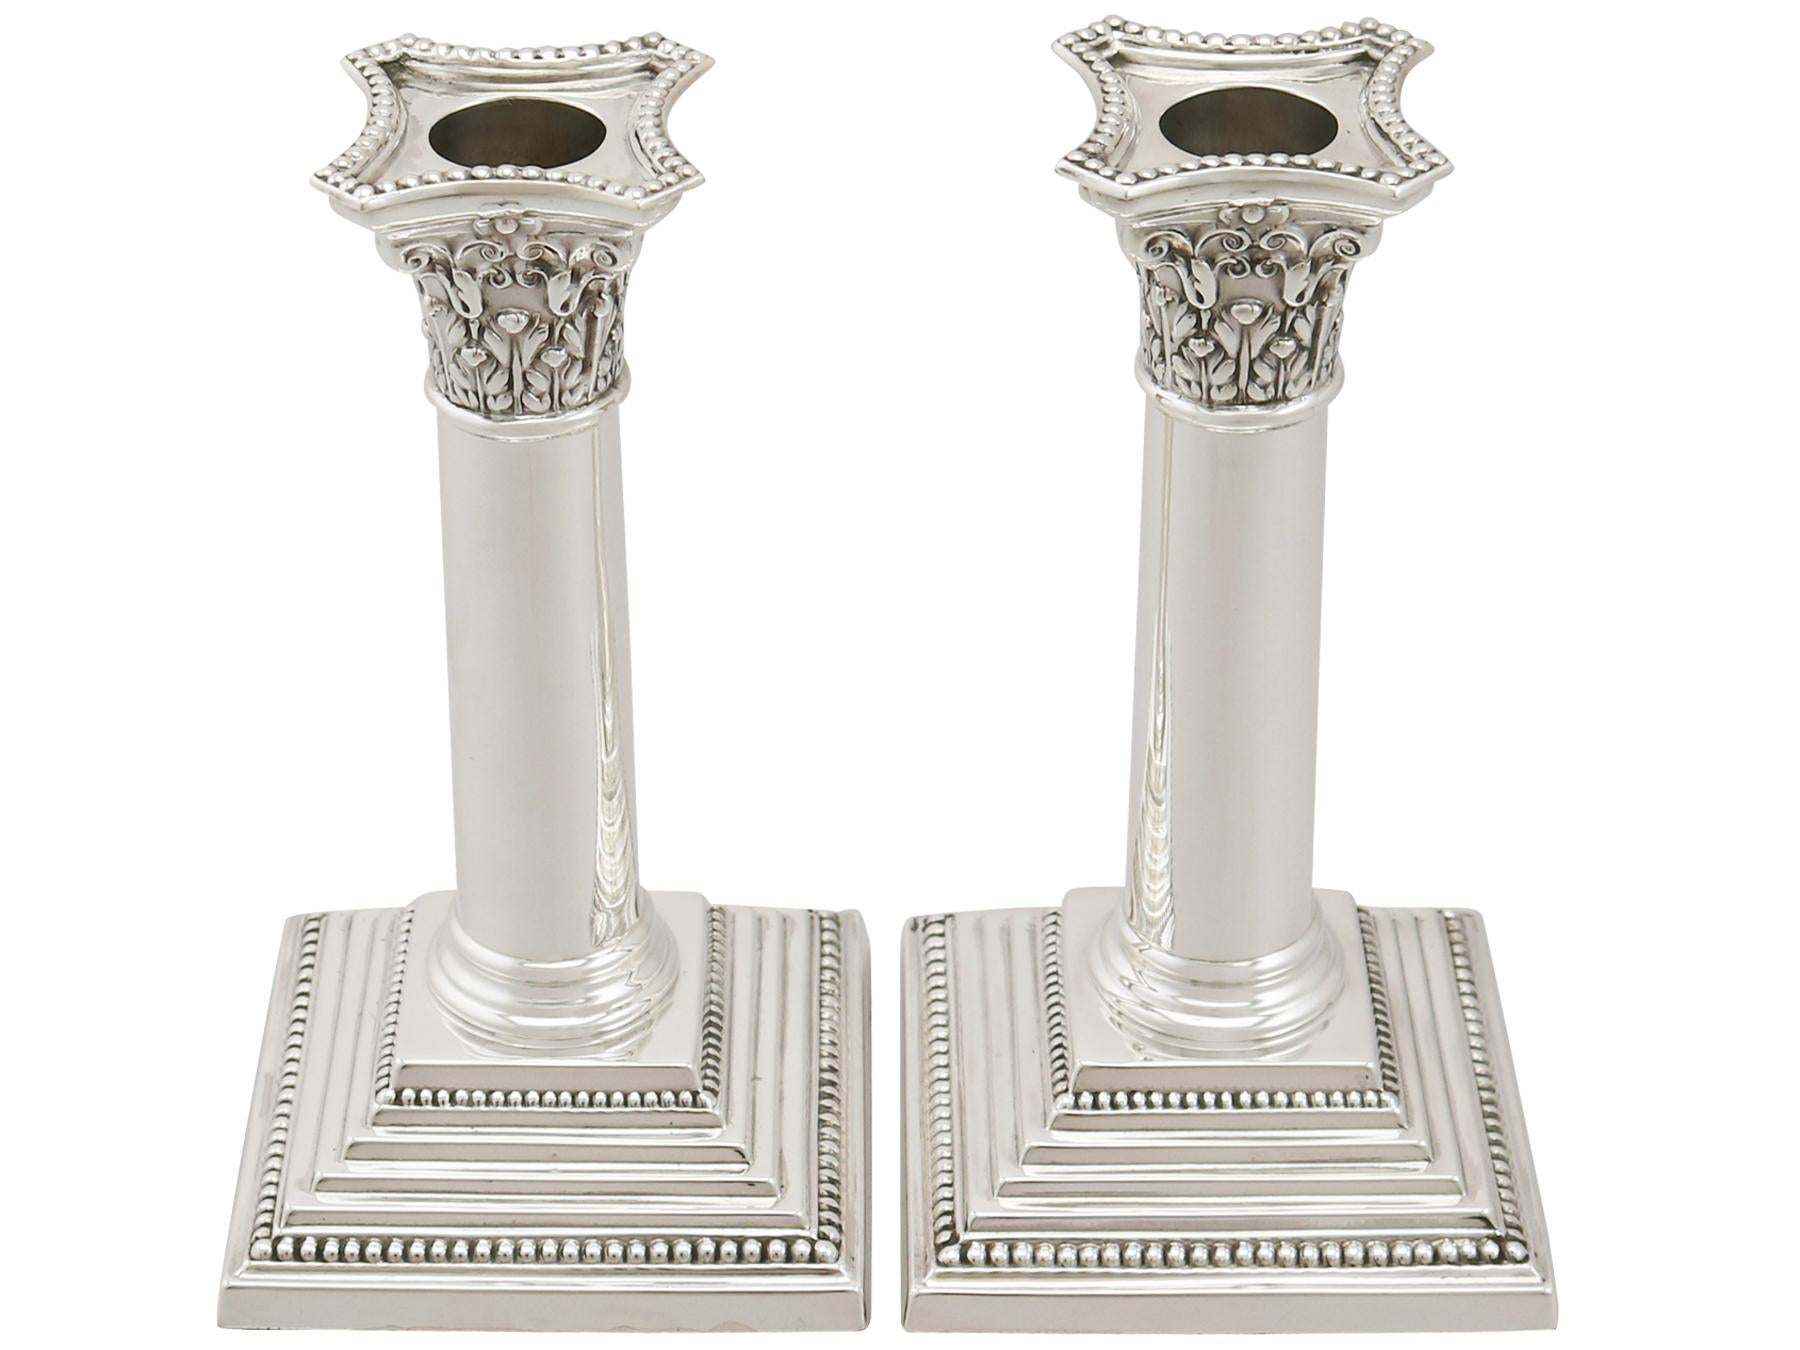 An exceptional, fine and impressive pair of antique George V English sterling silver candlesticks; part of our ornamental silverware collection.

These exceptional antique English sterling silver candlesticks have a plain cylindrical column to a